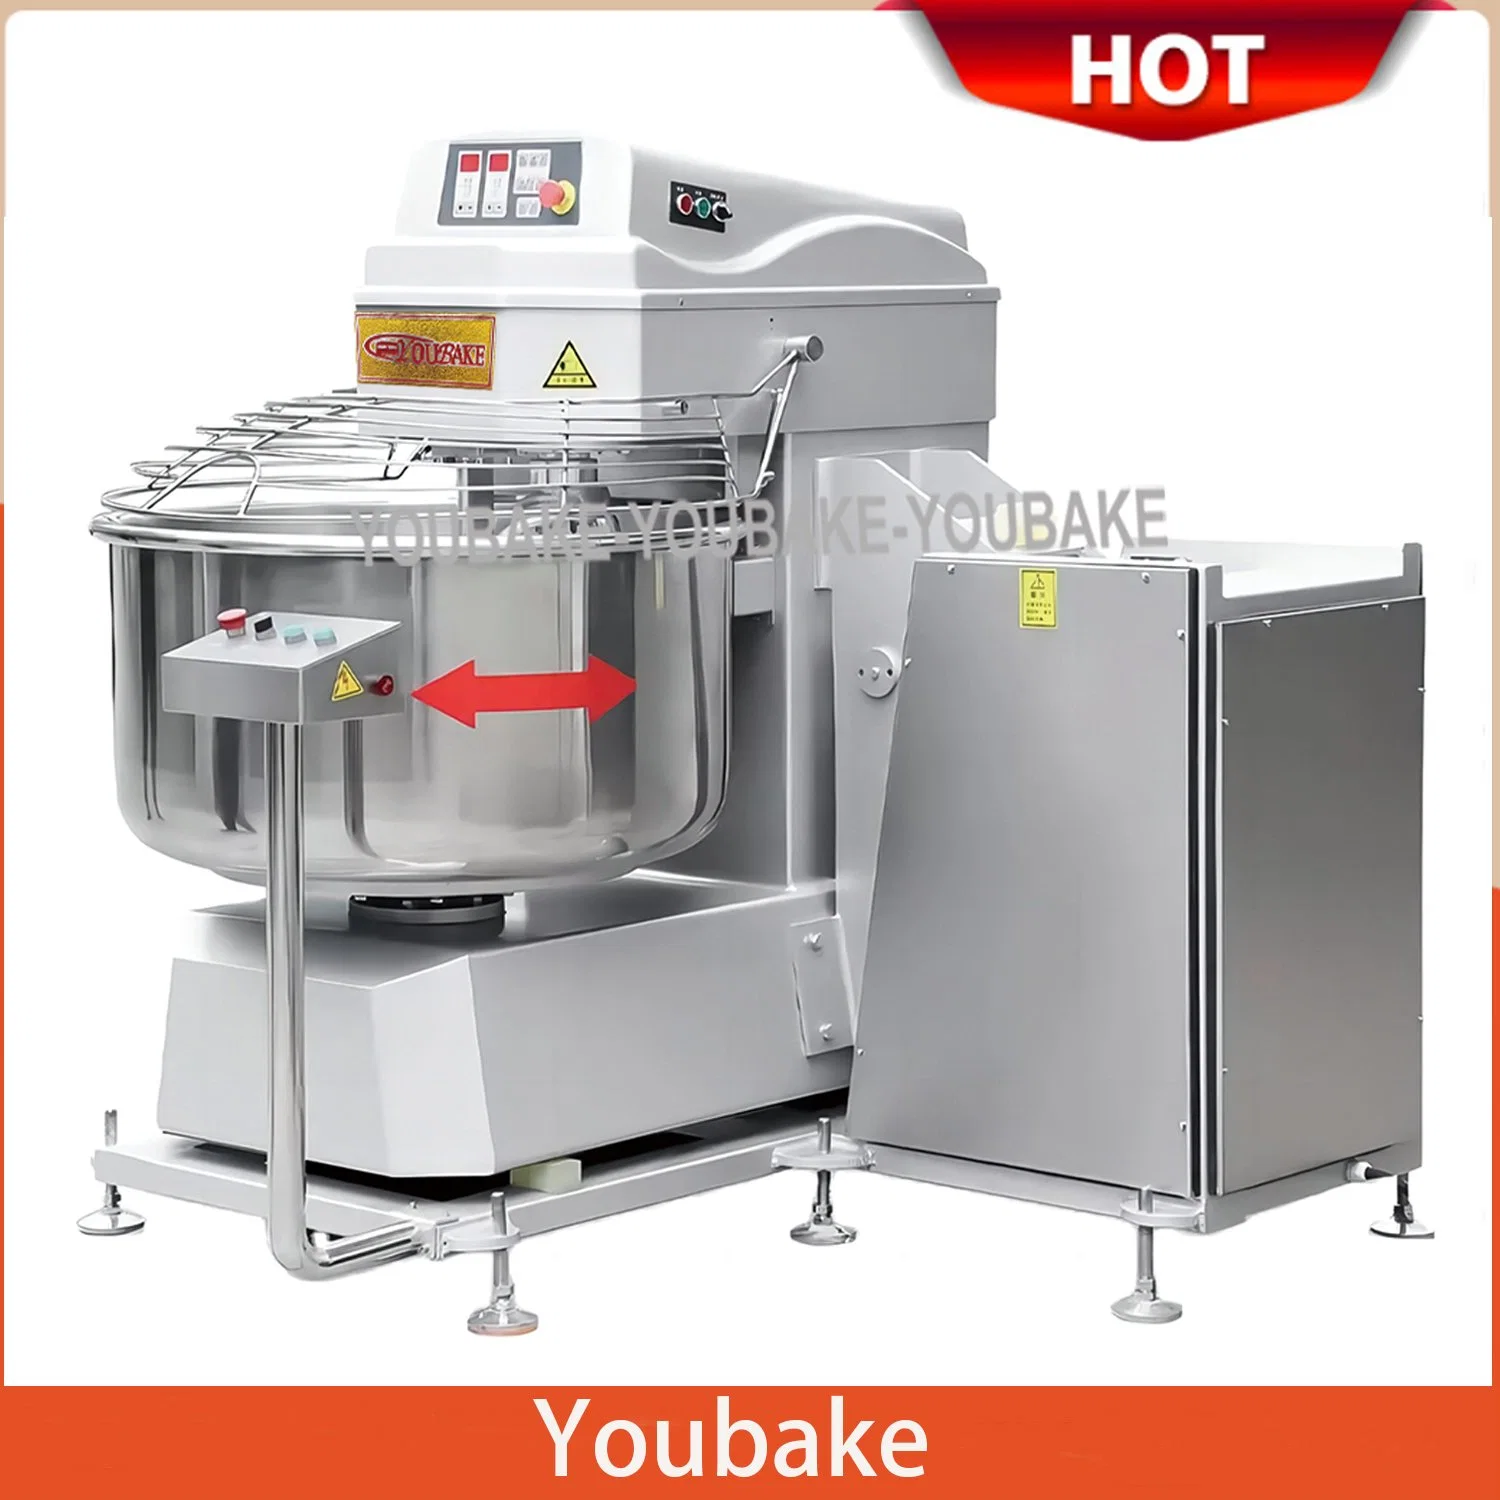 75kg Commercial Industrial Overturning Spiral Mixer with Lift Removable Bowl Flour Dough Mixer